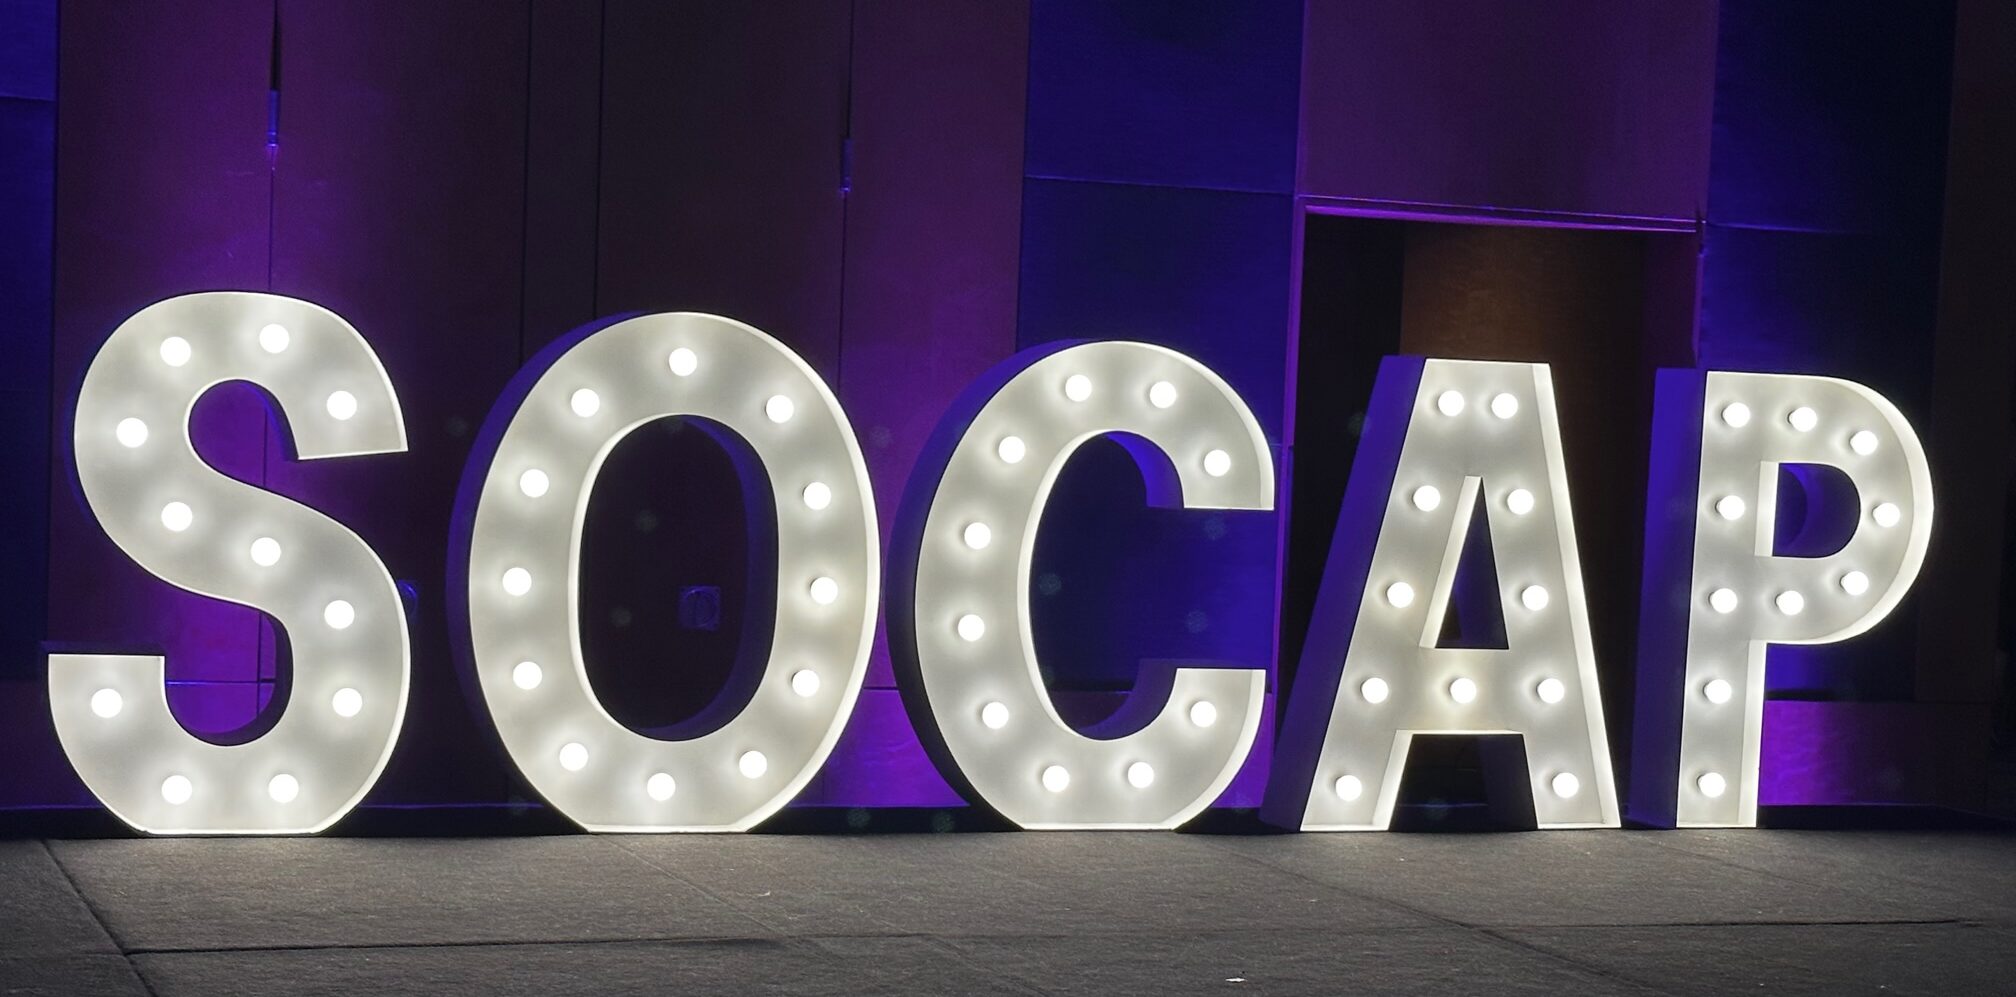 A lighted sign of 5 big letters spelling "SOCAP" - the association dedicated to helping professionals in charge of resolving customer disputes.